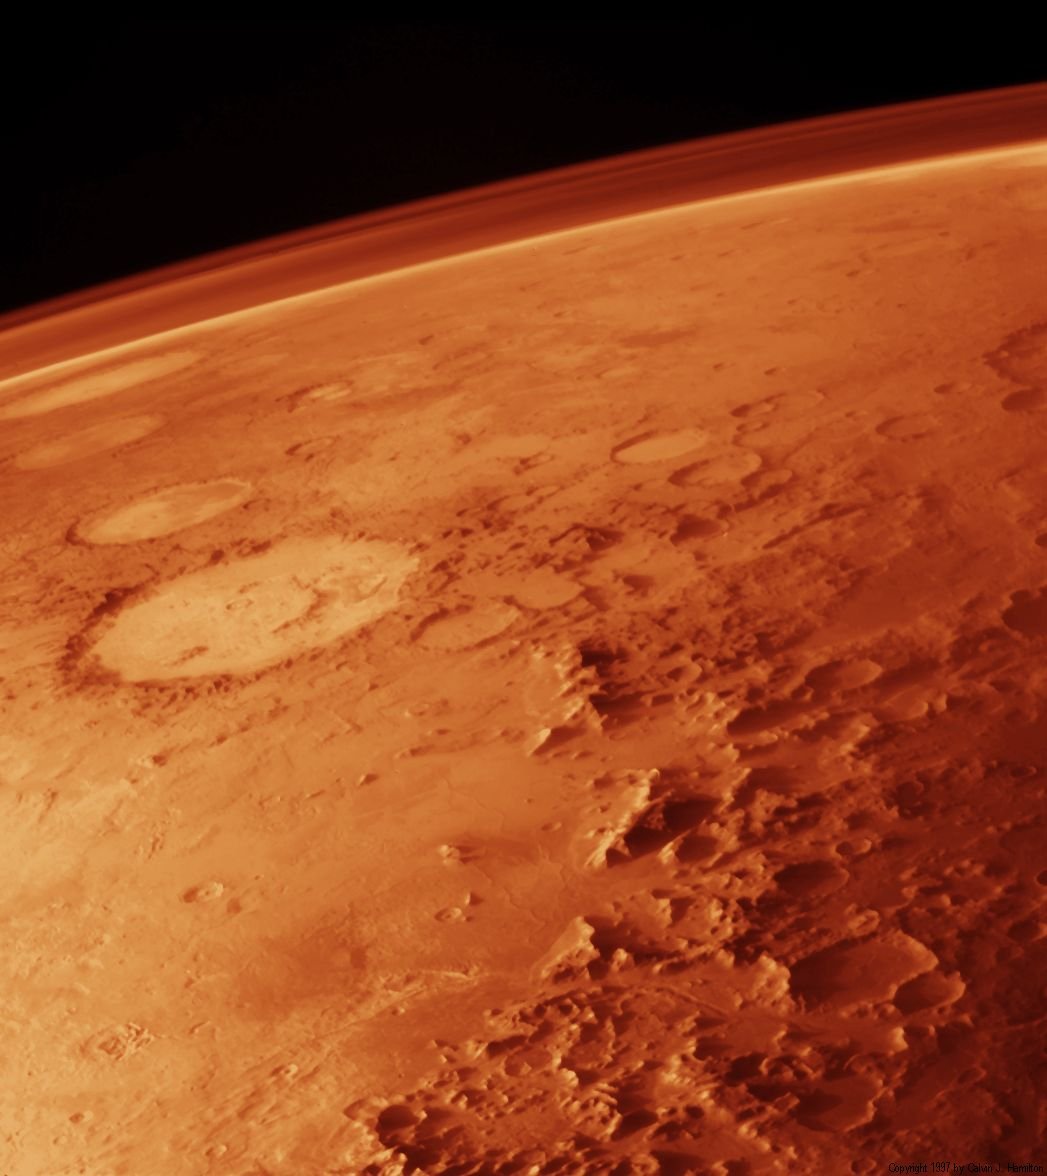 Oxygen Discovered On Mars, The Evidence For Martian Life Is Mounting